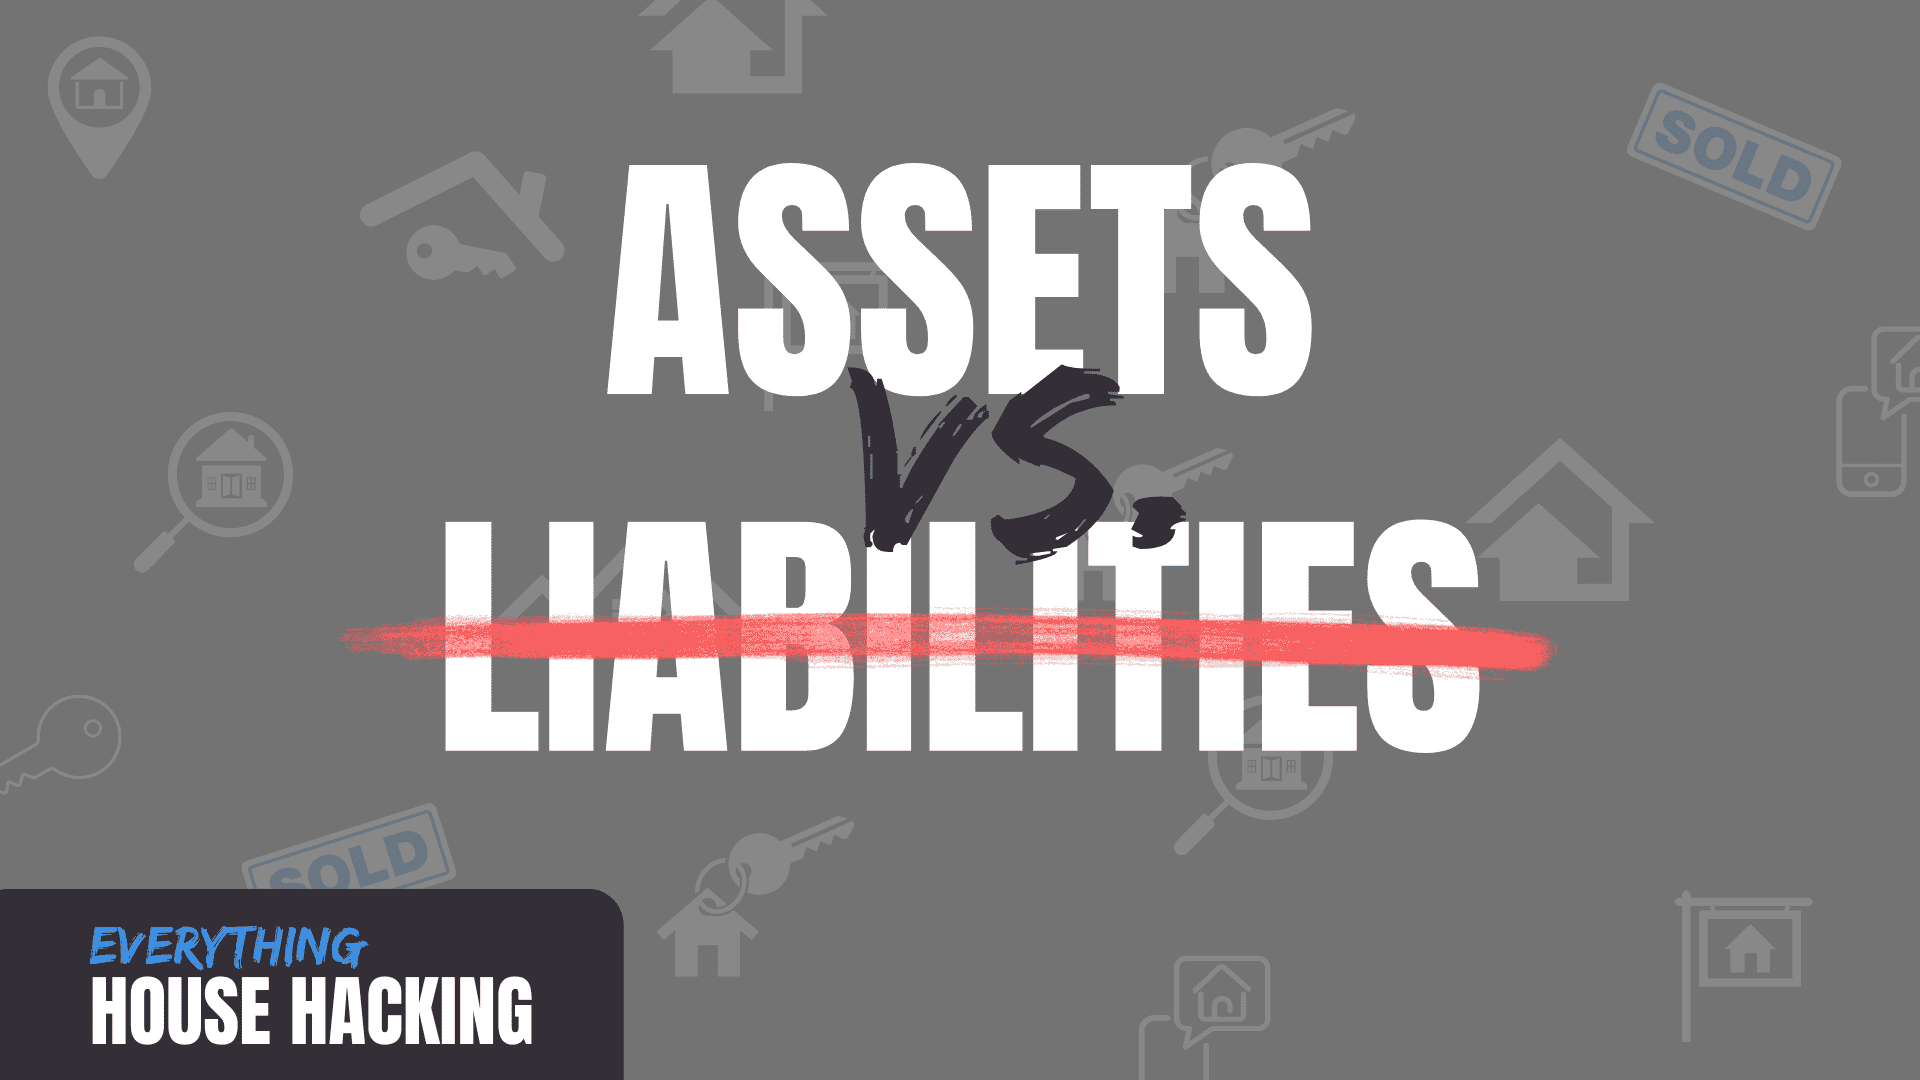 Why You Should Buy Assets, Not Liabilities